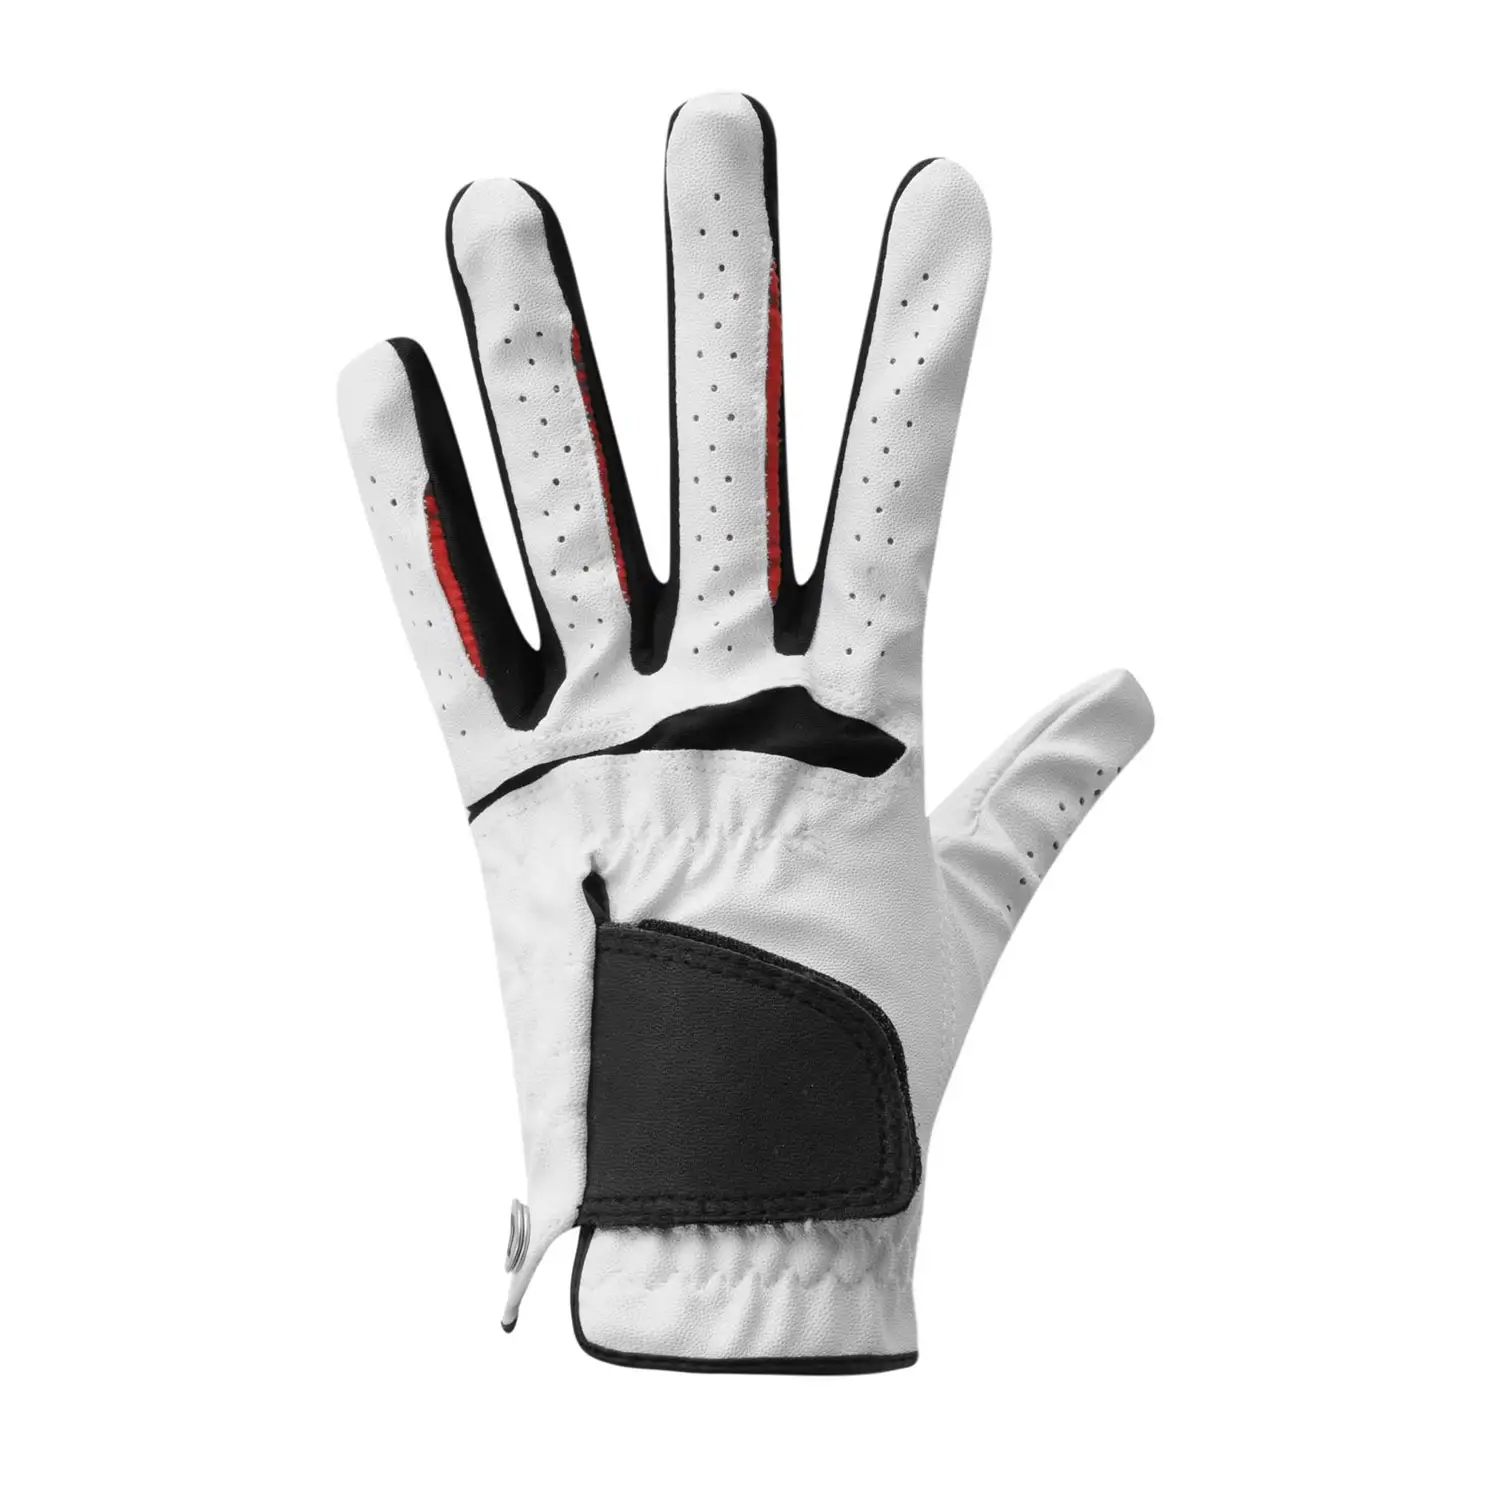 Feel Plus Golf Glove Golfing Excellence With Innovative Cool Finger Inserts And Long-lasting Design Golf Gloves